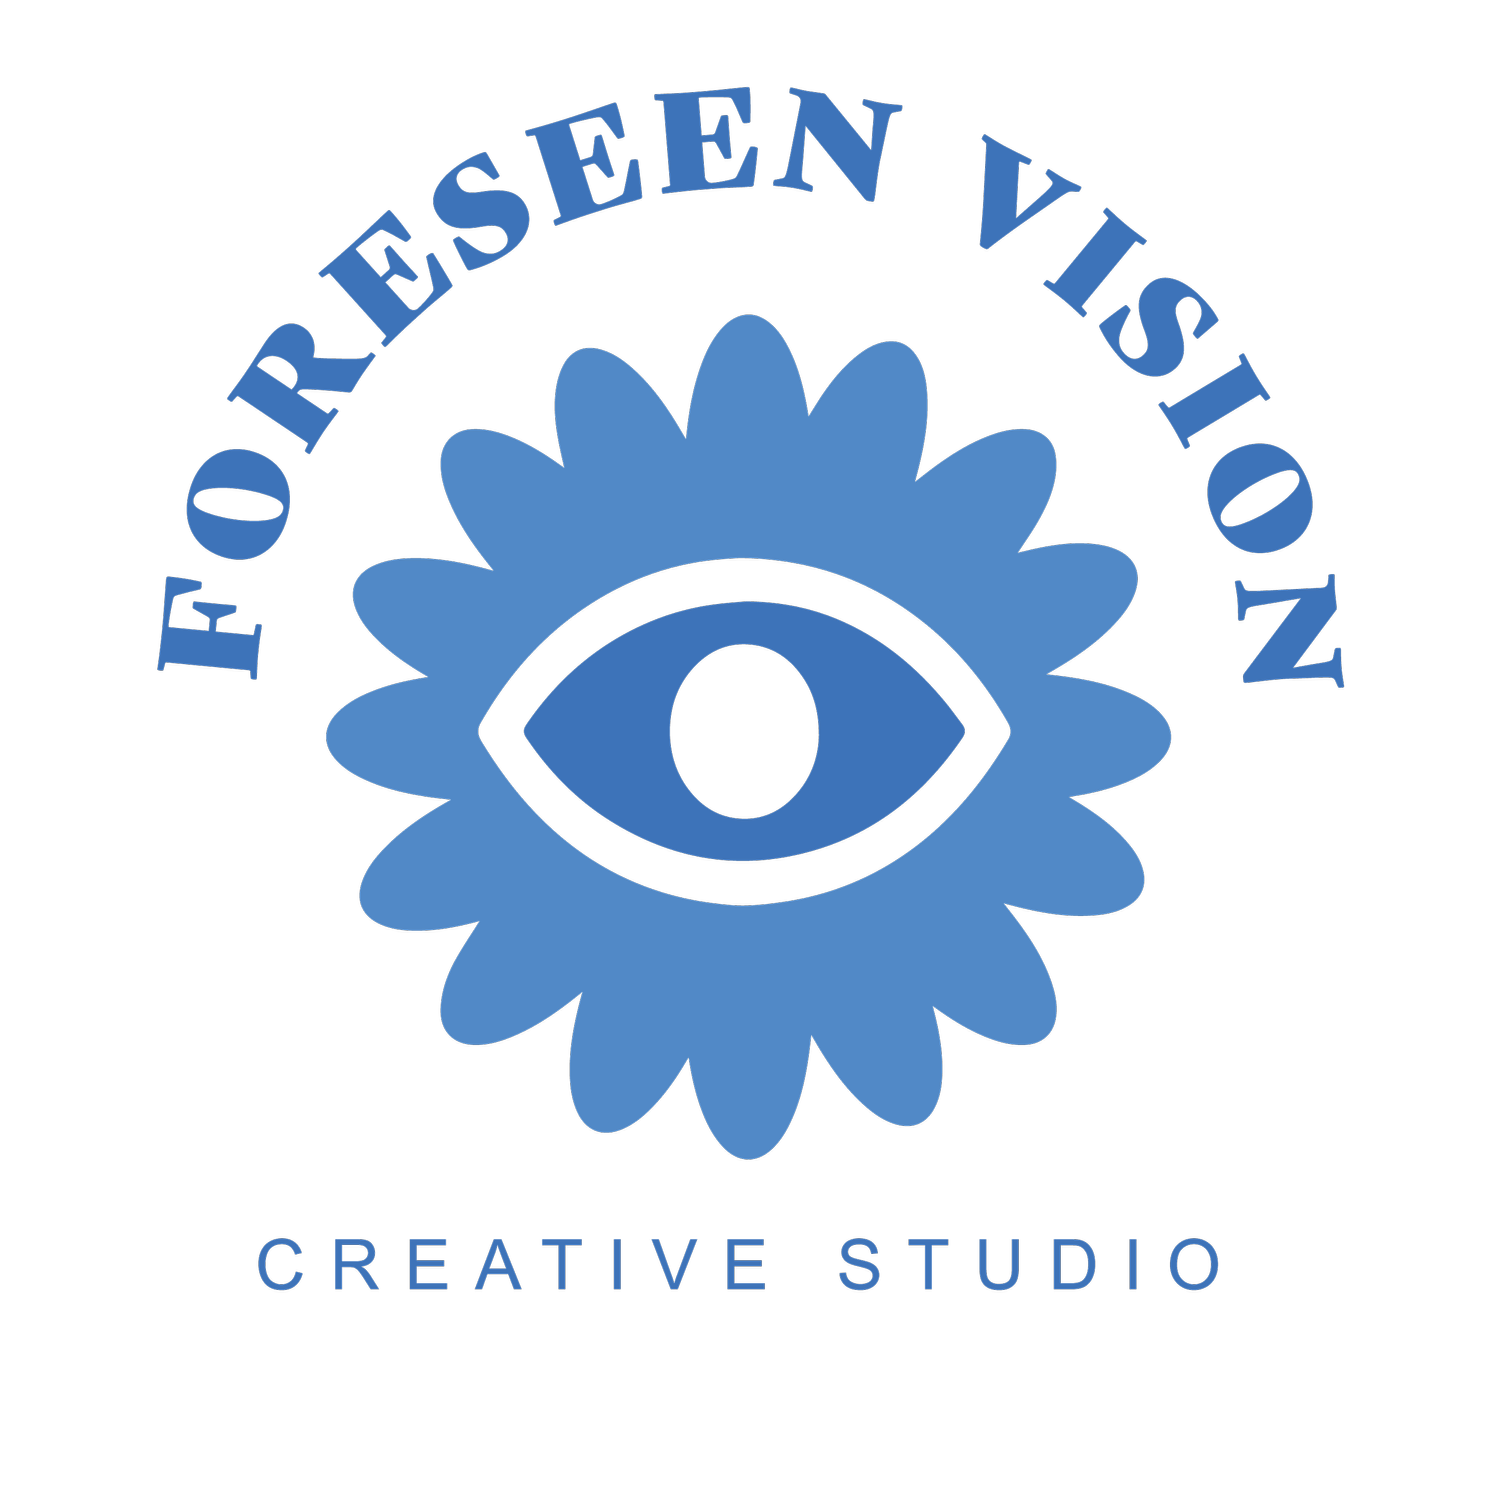 Foreseen Vision